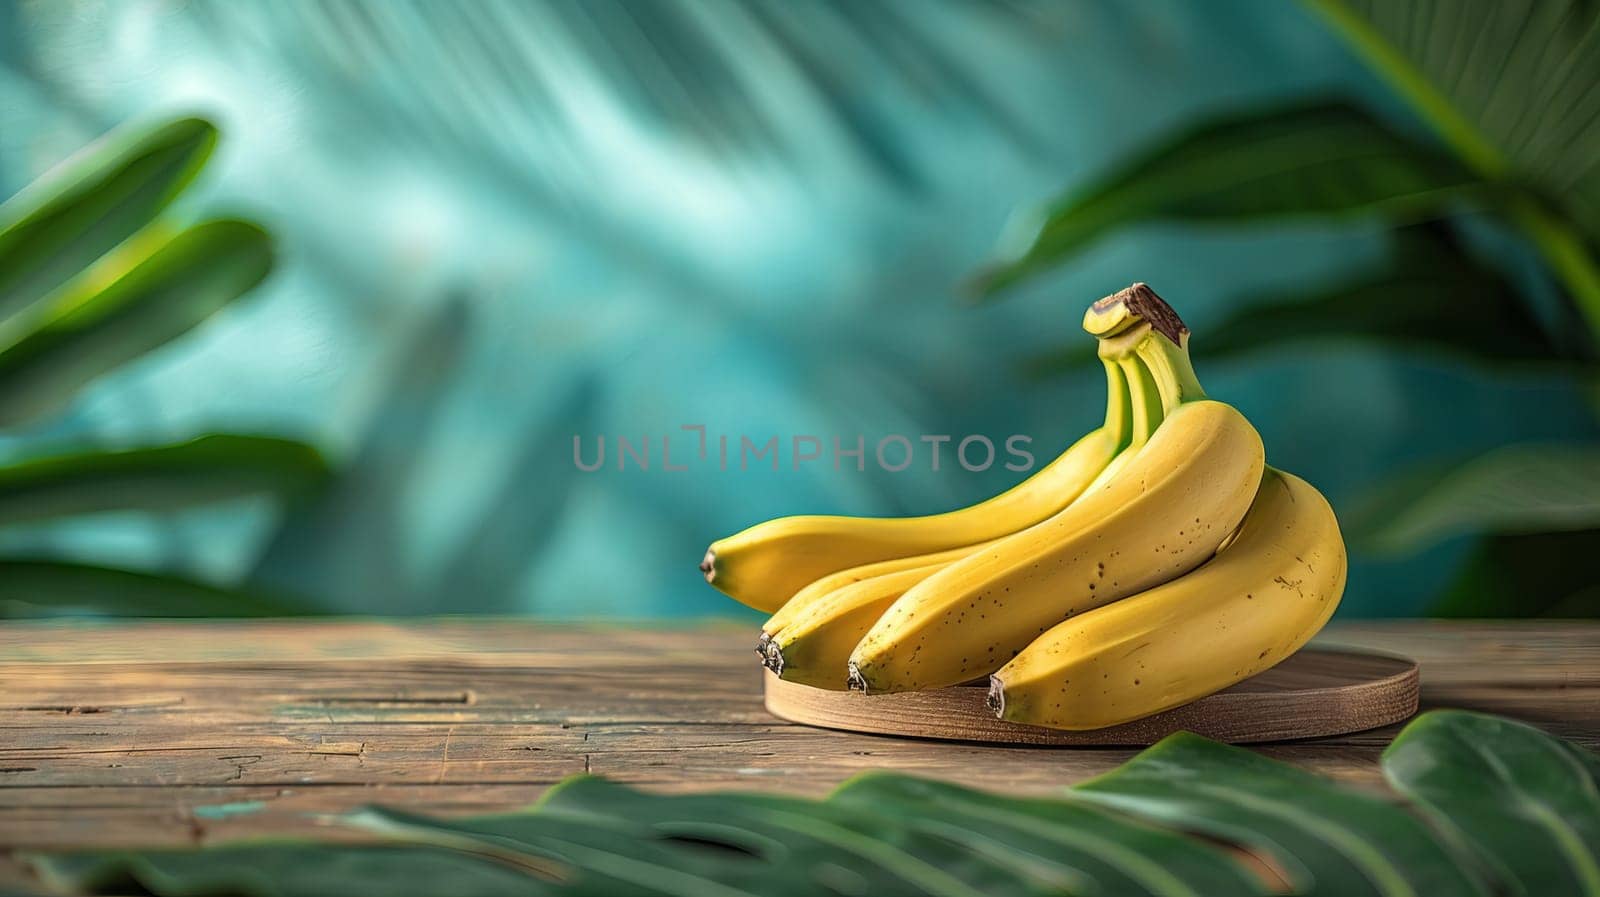 Ripe fresh bananas on a wooden surface, tropical background.